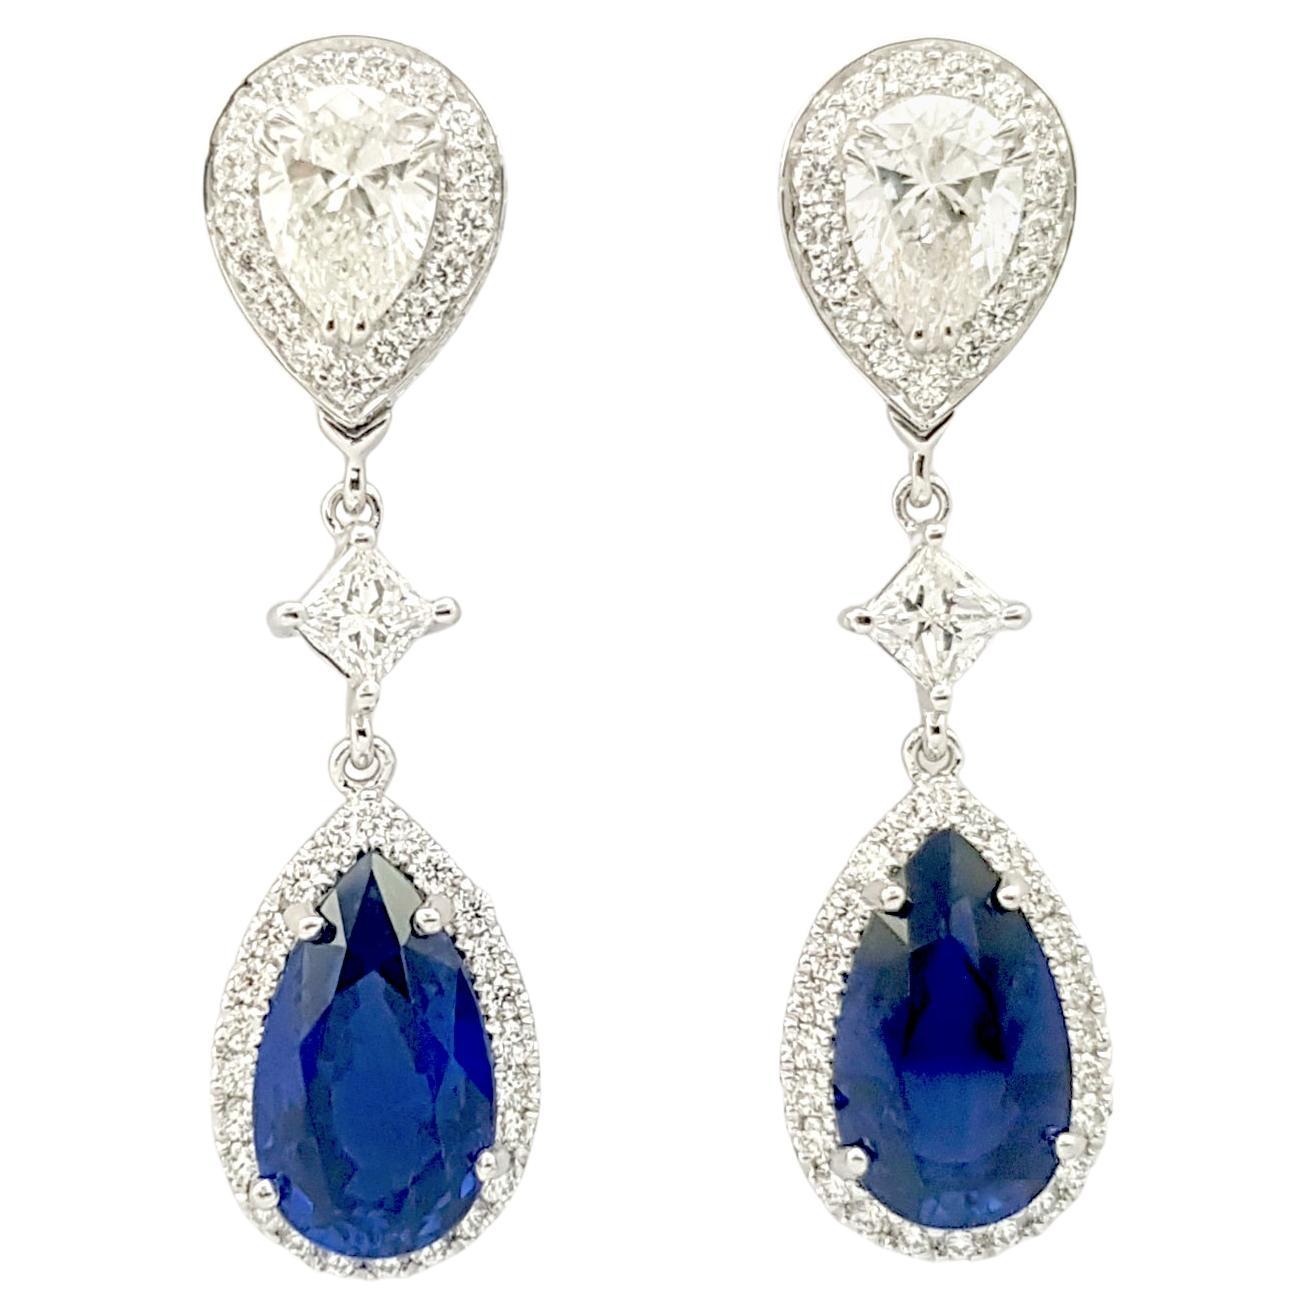 GIA Certified Ceylon Blue Sapphire and Diamond Earrings set in Platinum 950